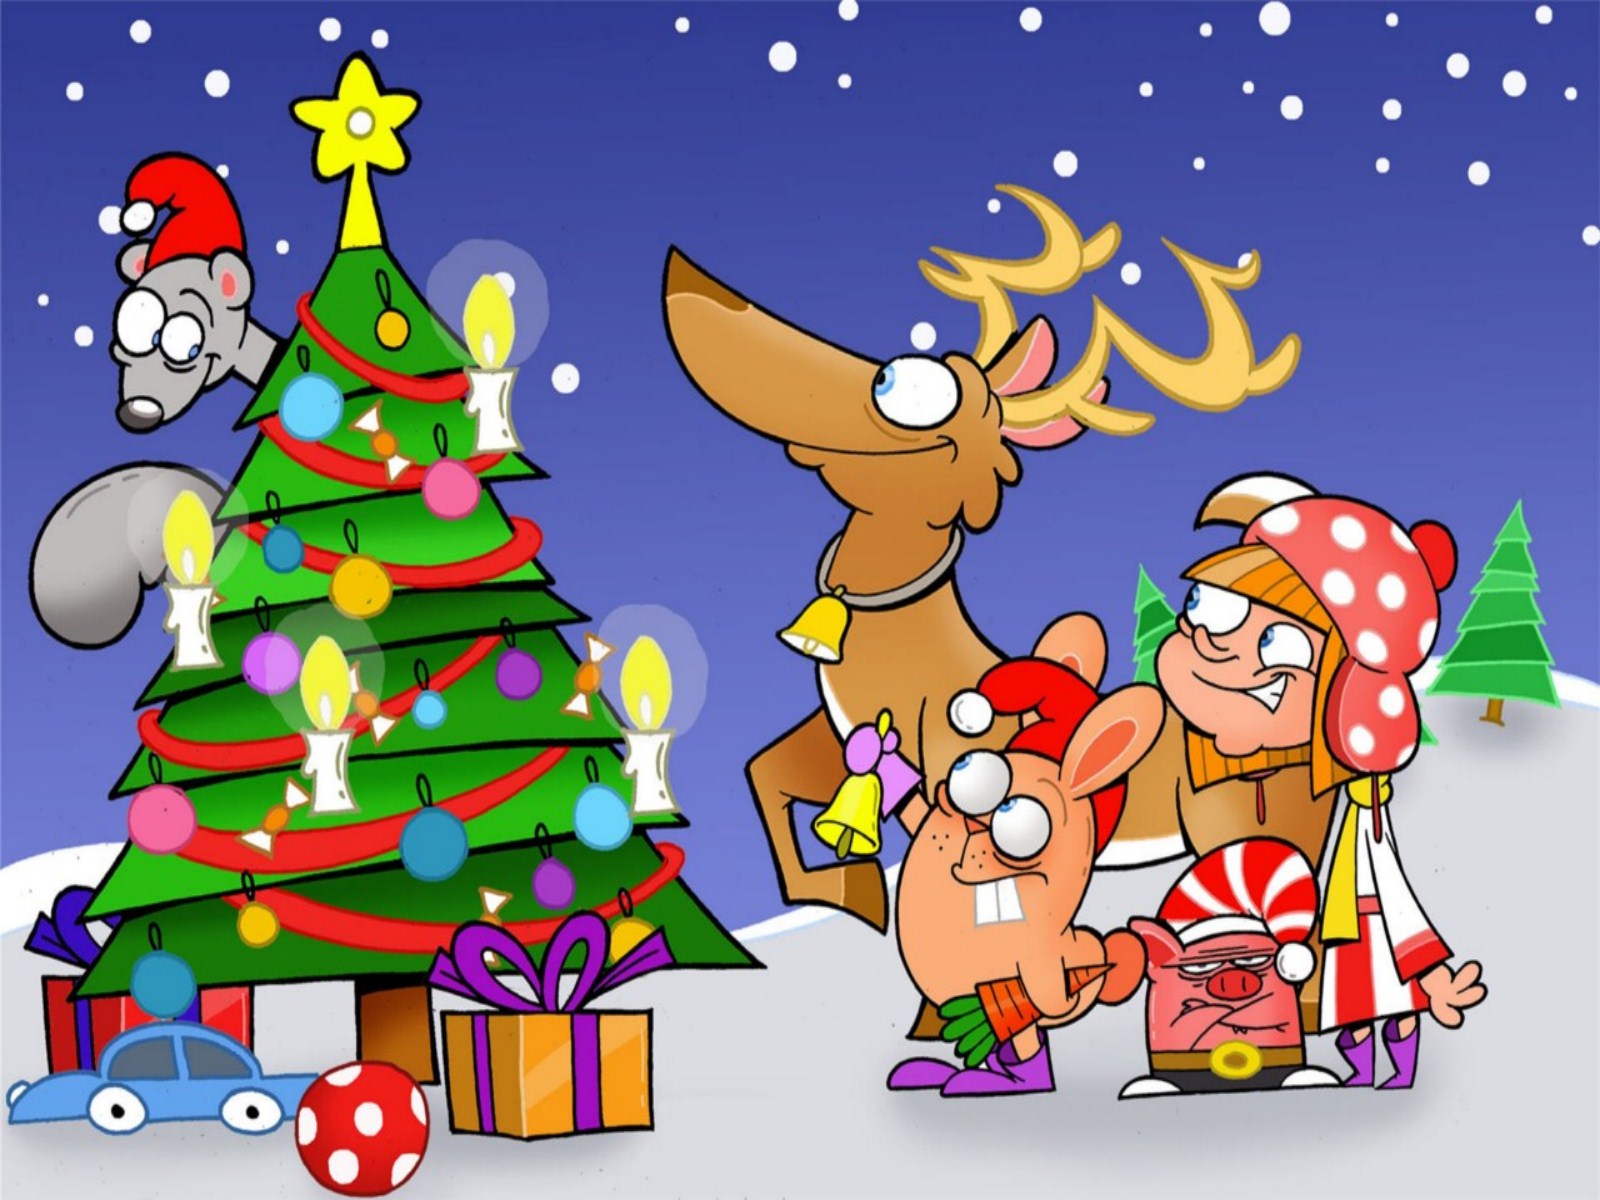 Funny Christmas Backgrounds Wallpaper   1600x1200   297367 1600x1200